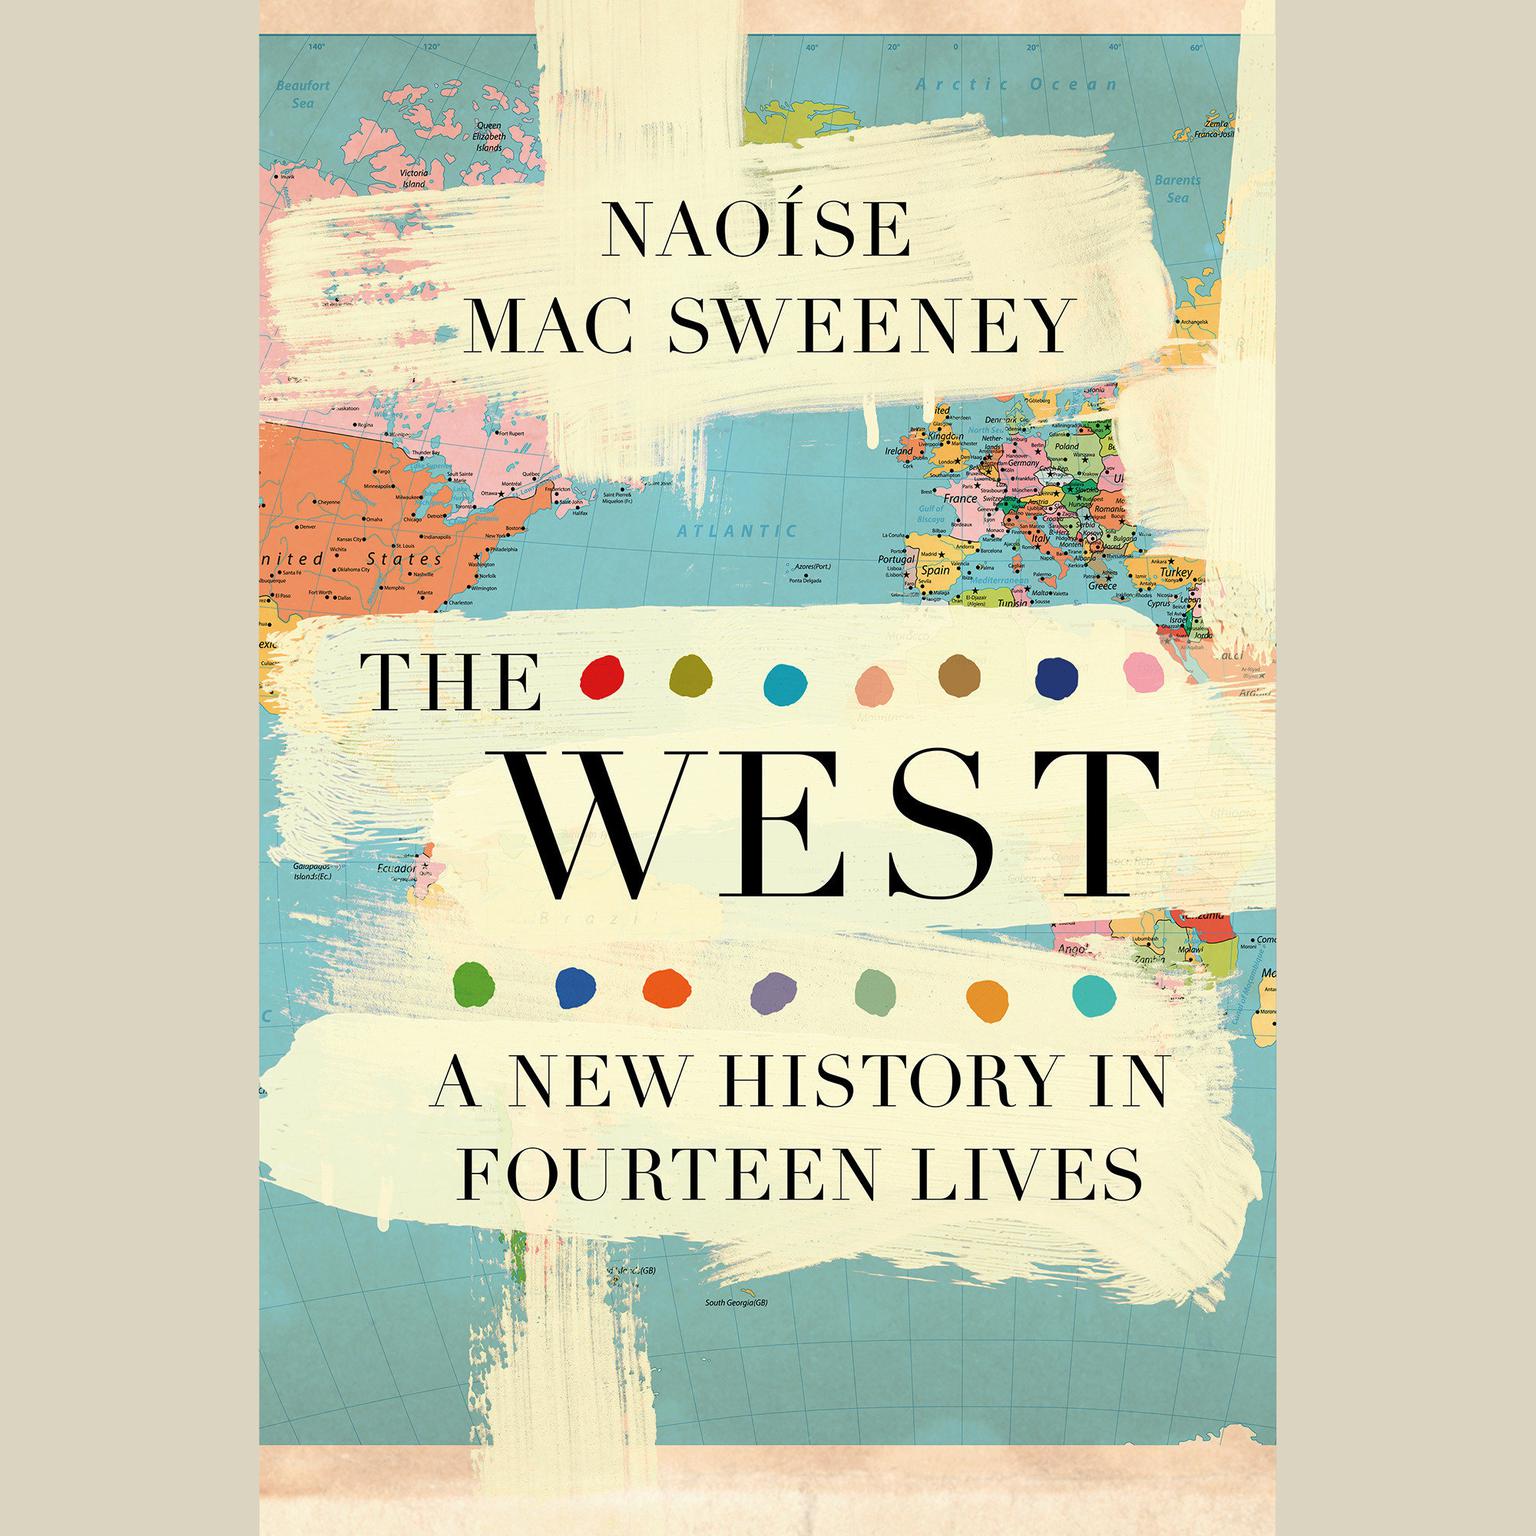 The West: A New History in Fourteen Lives Audiobook, by Naoíse Mac Sweeney